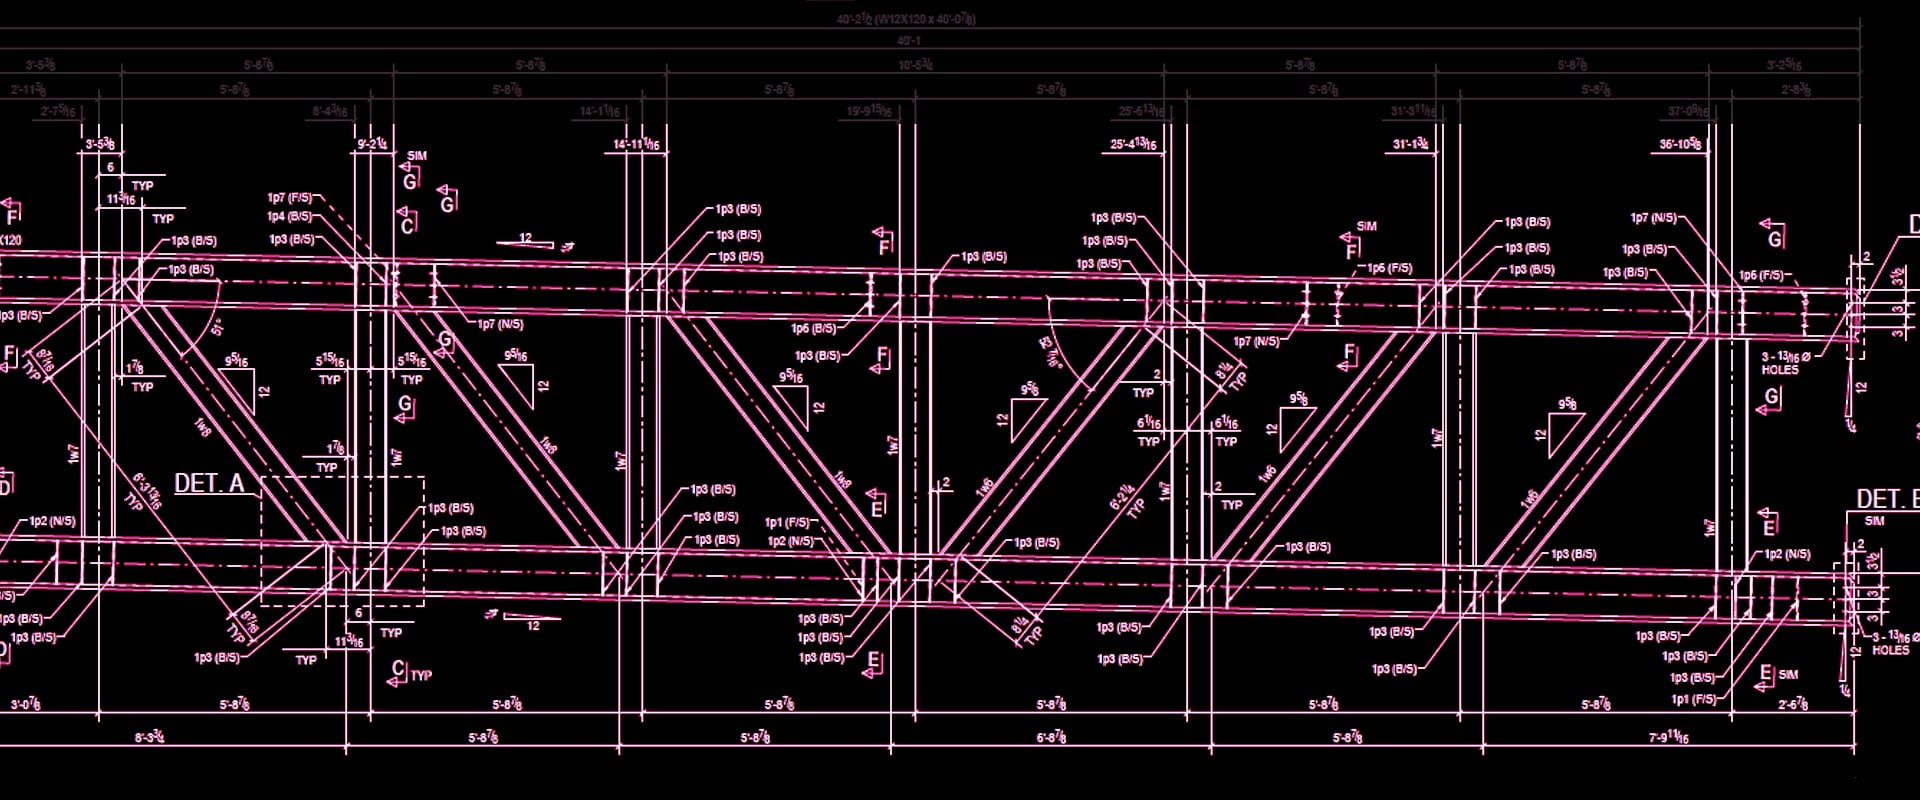 shop drawing services